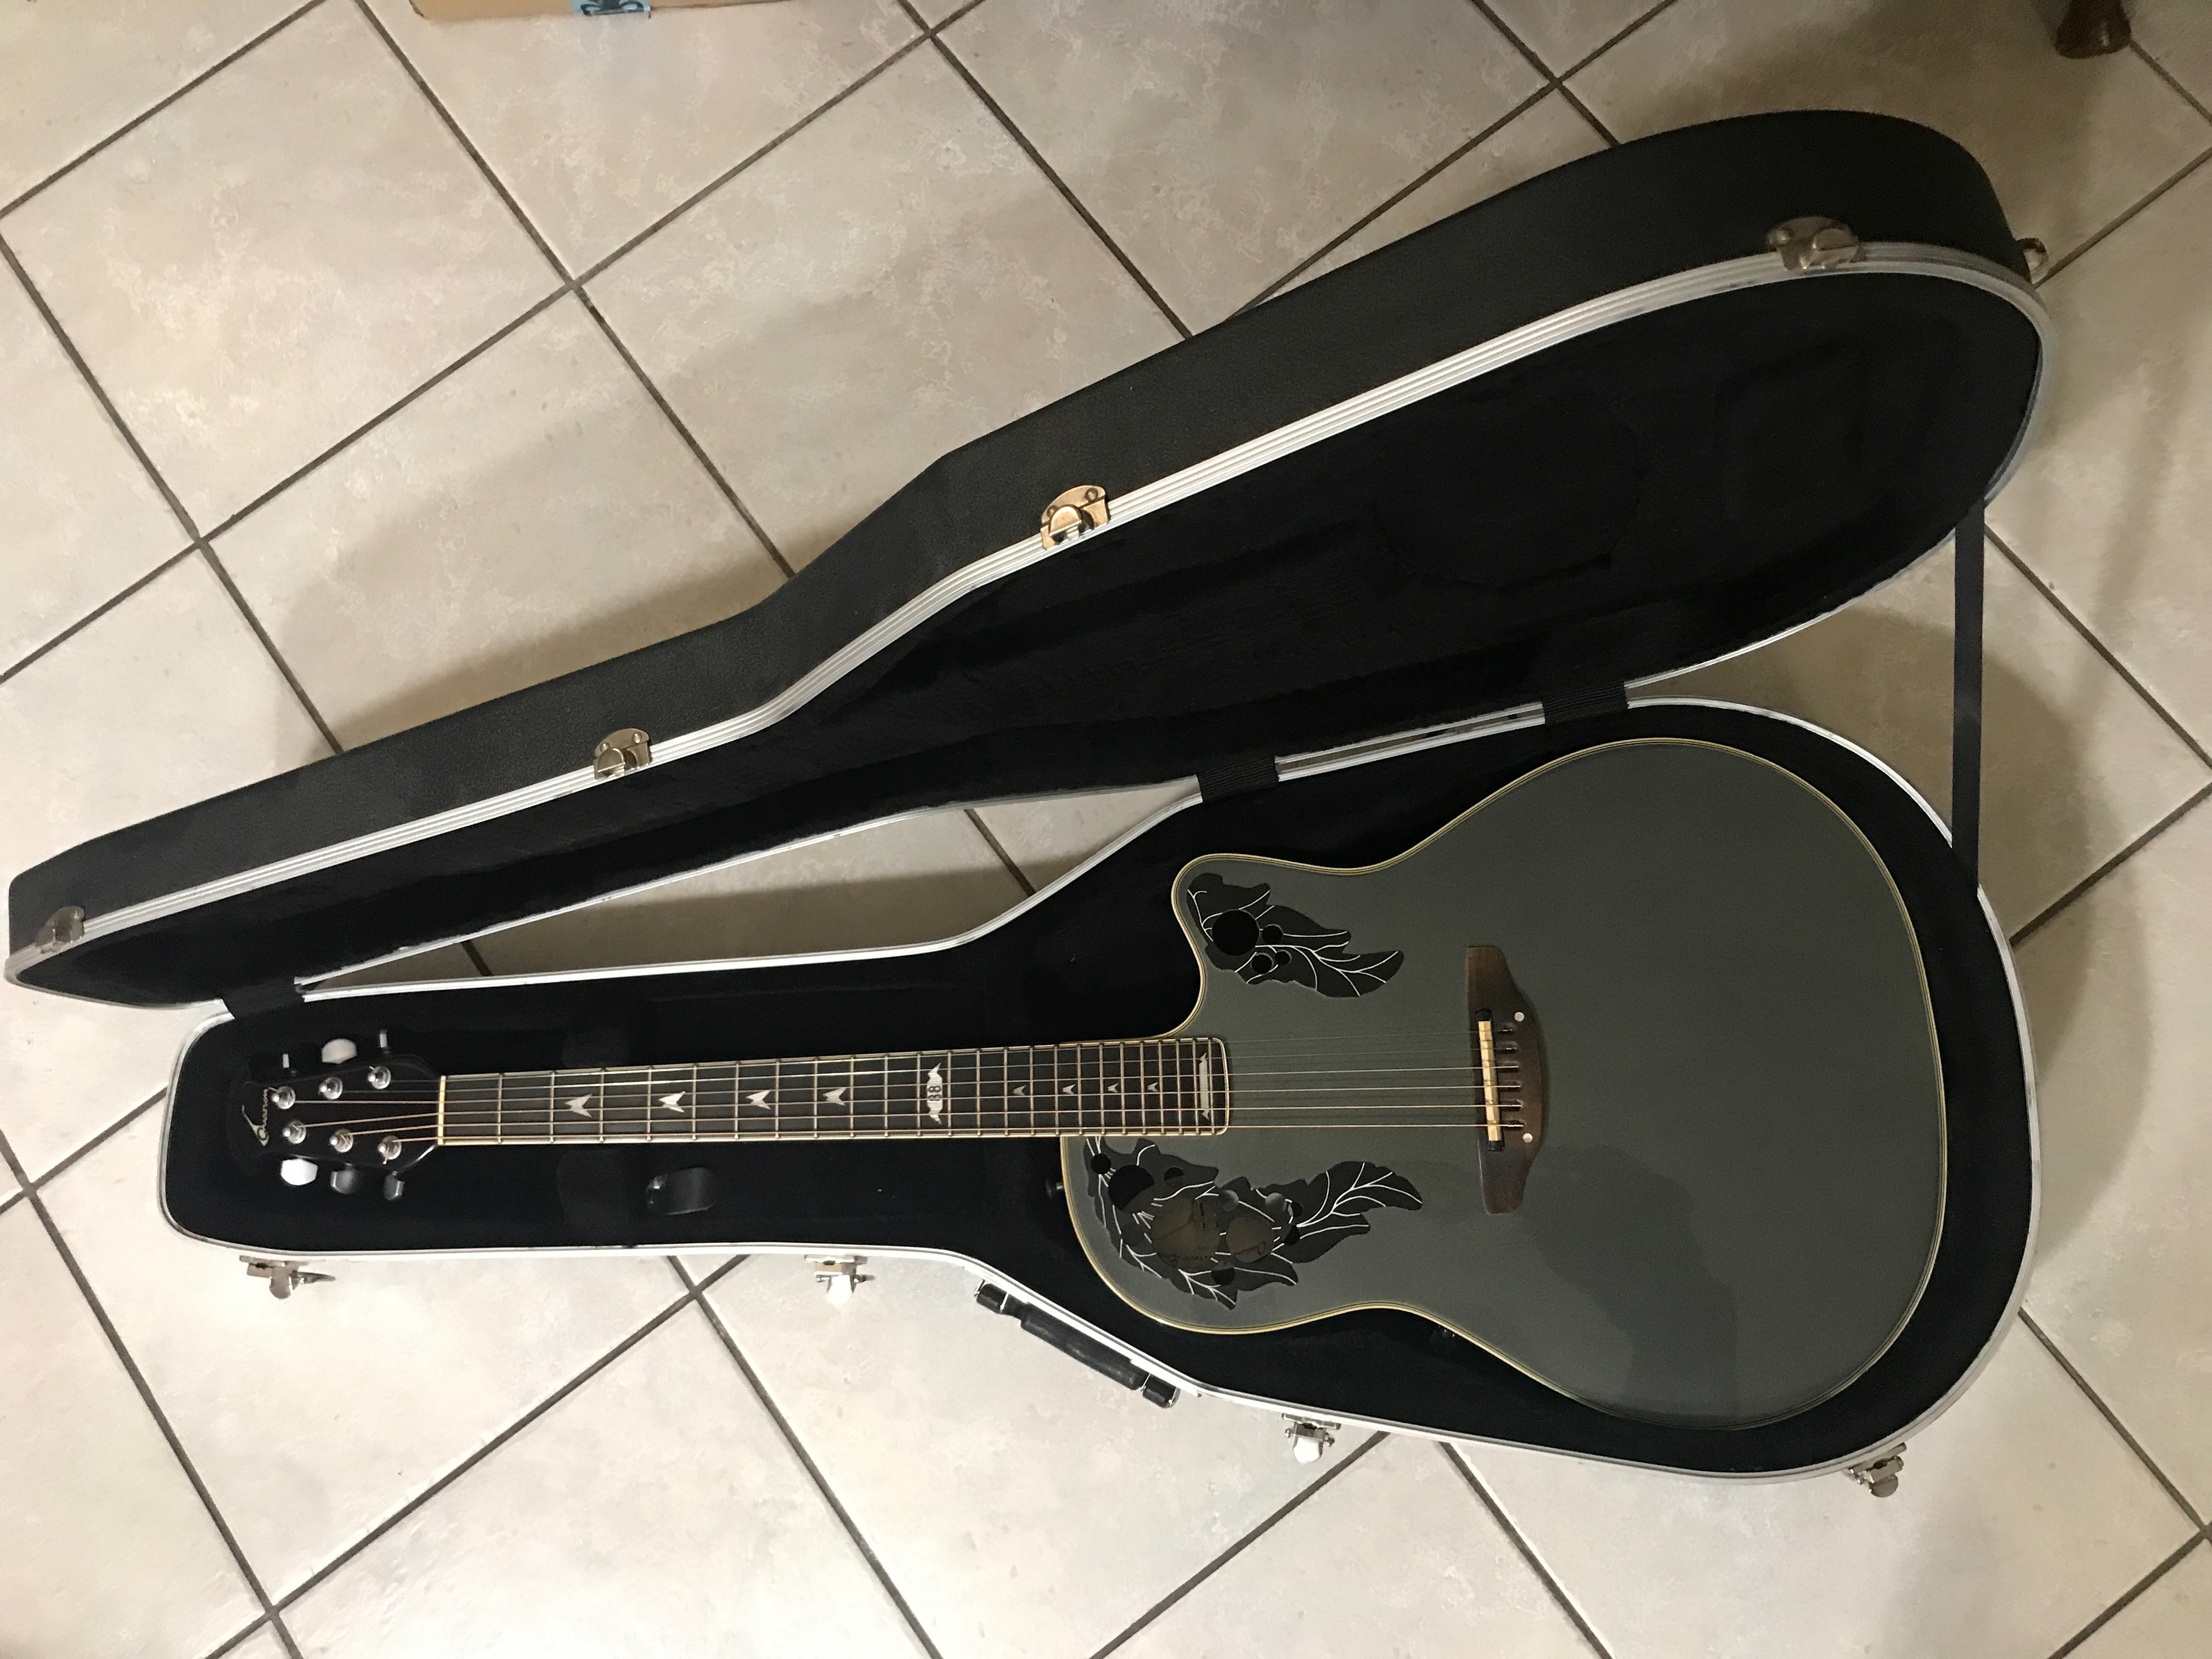 Gone but not forgotten: the Ovation guitars that I owned